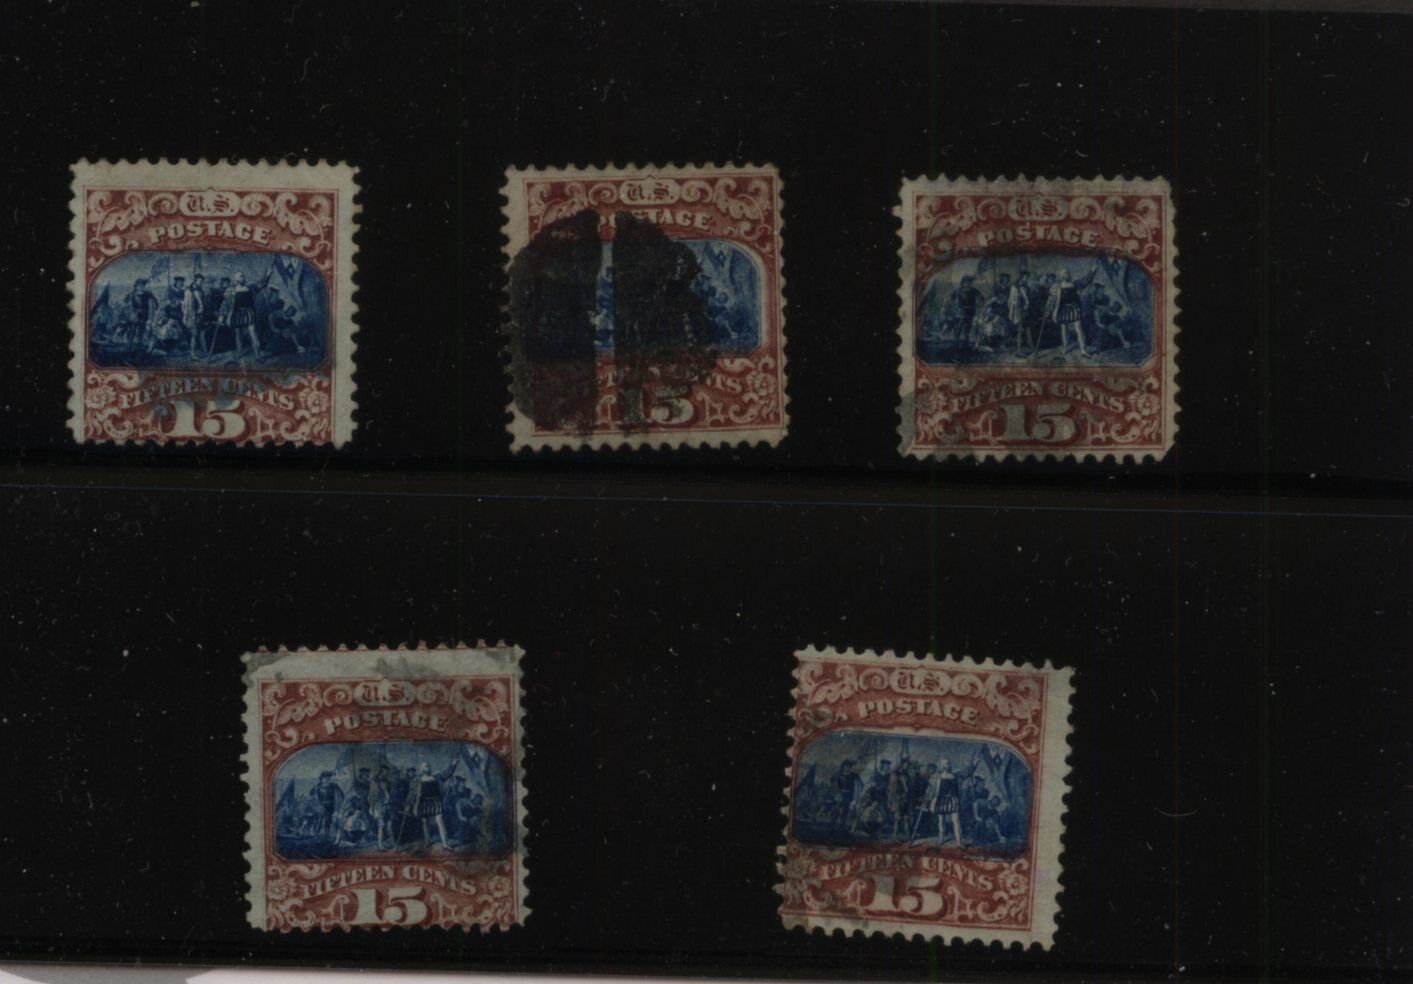 US 119 nice Columbus Mall lot of 5 $950.00 catalog ☆ popular stamps MS0310 used